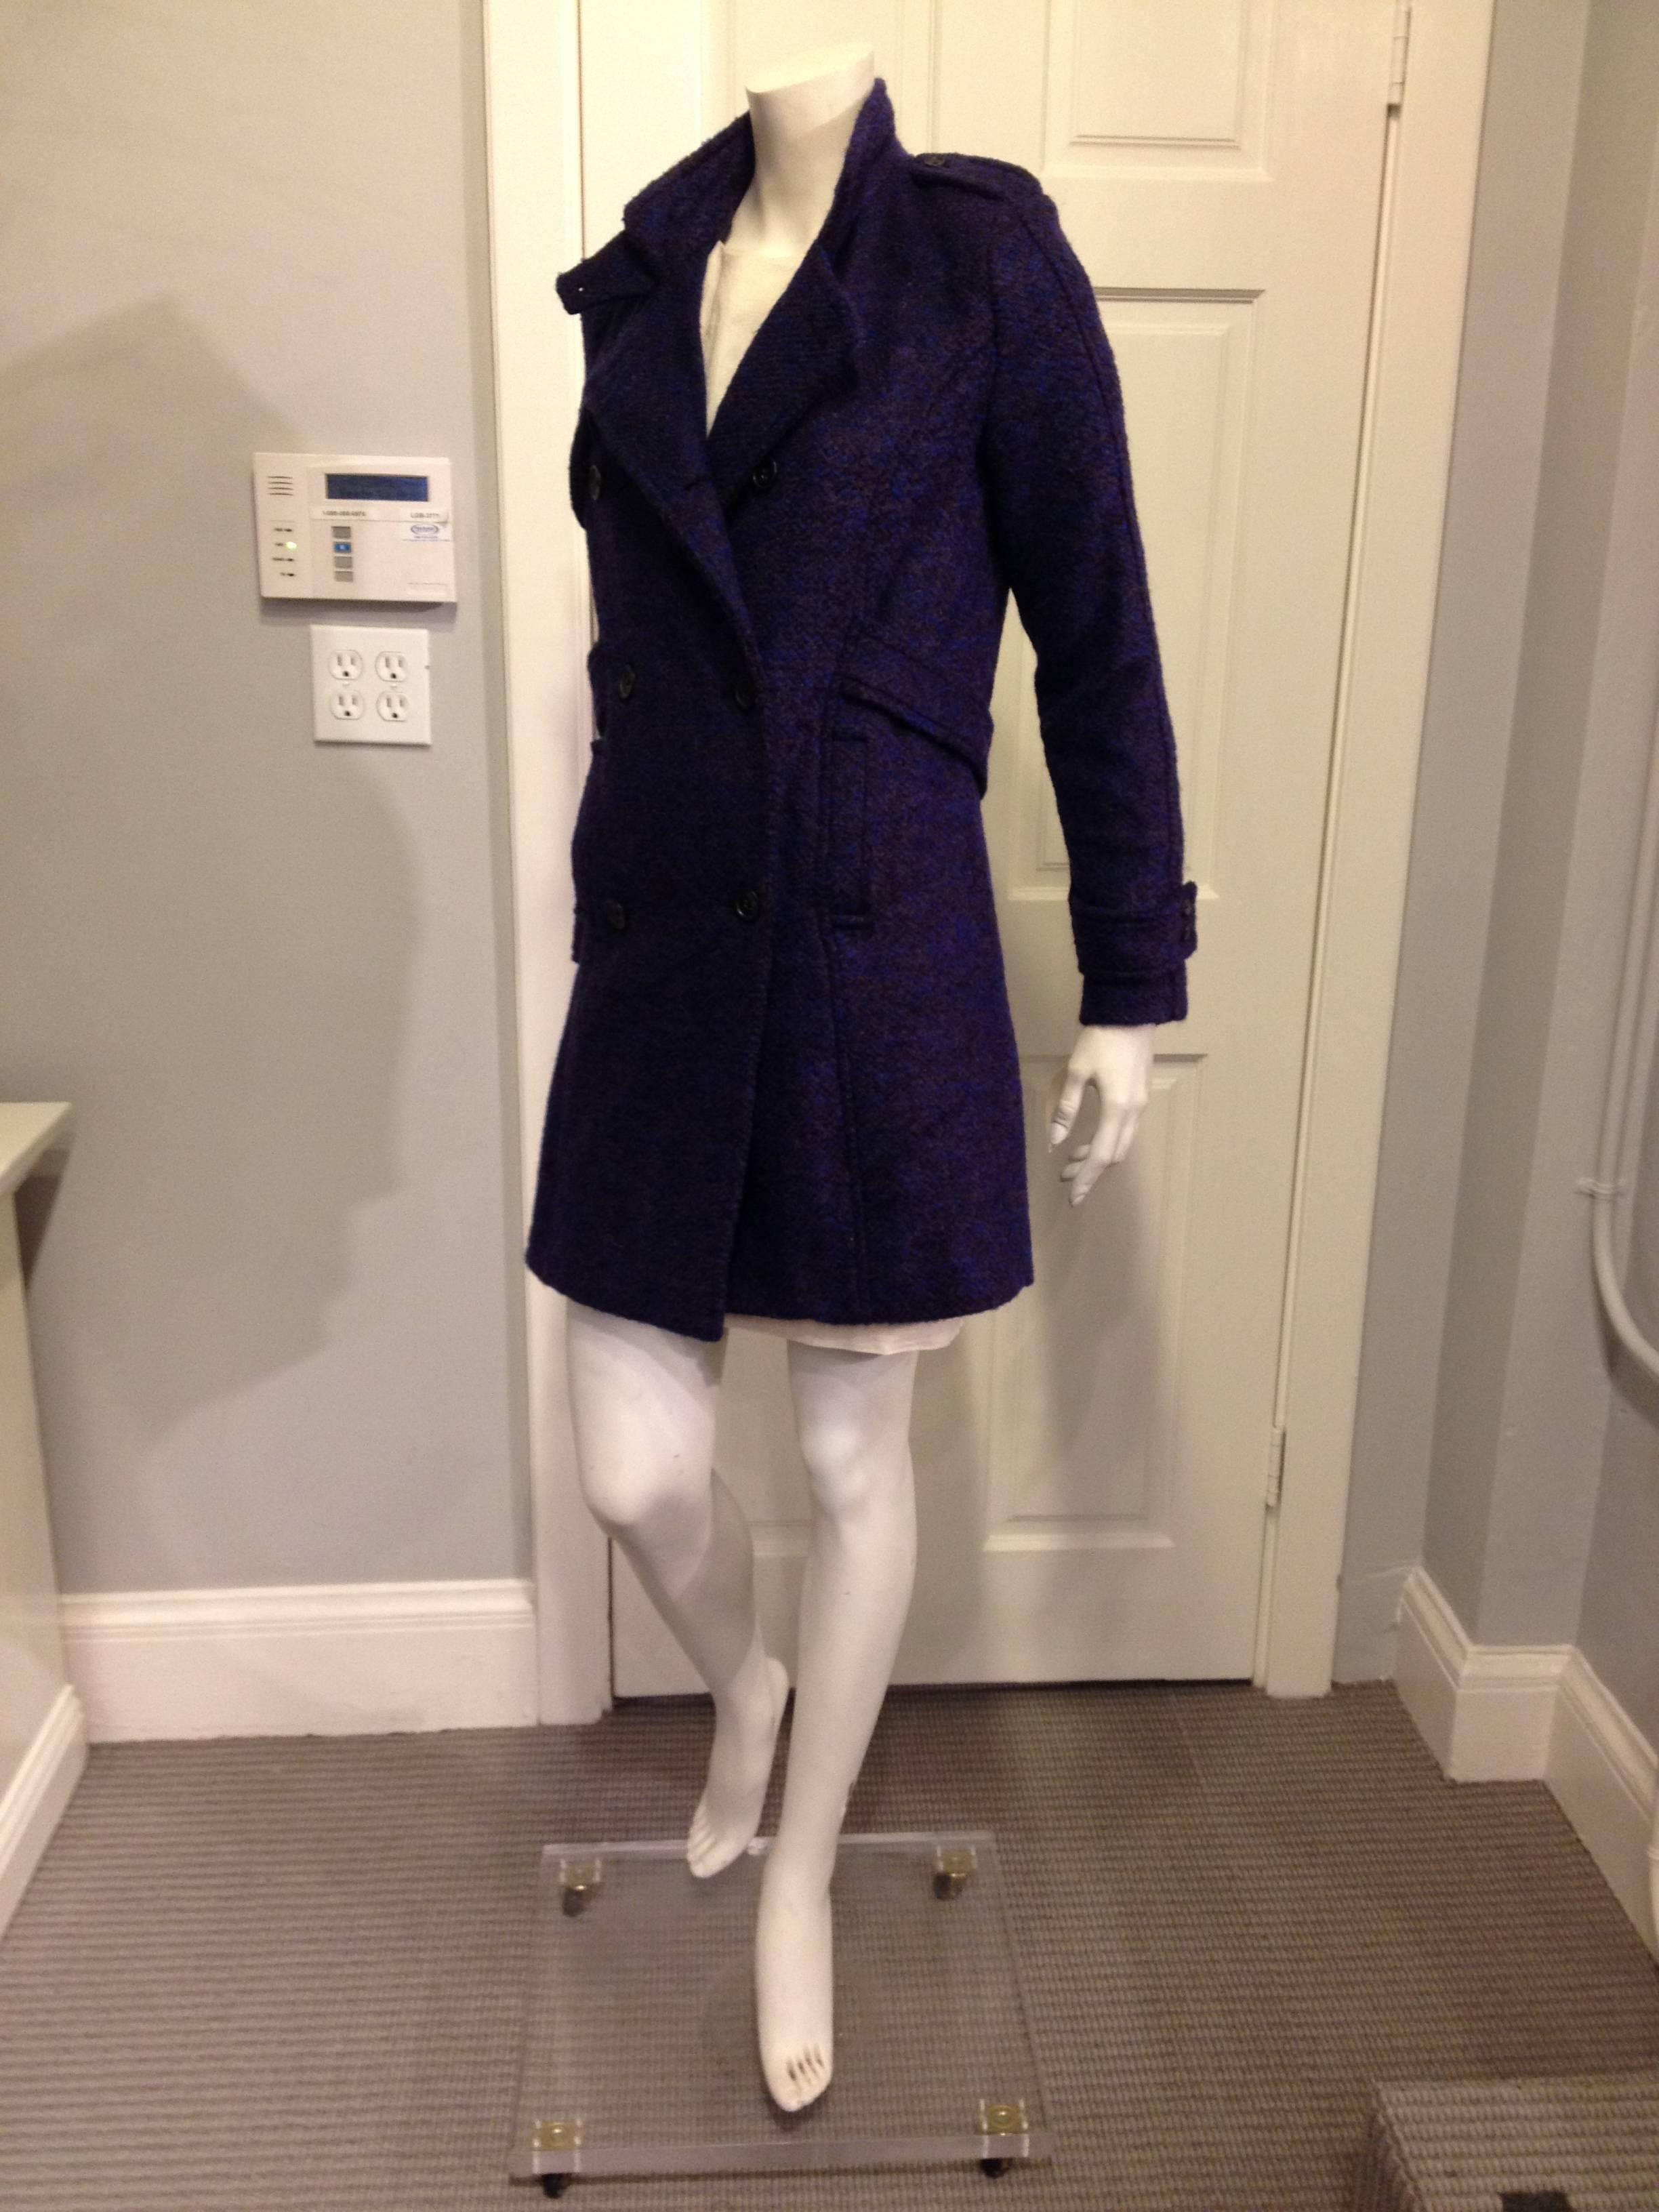 Styled like a trench coat with button epaulets, a double-breasted front, notched-lapel collar, and a loose fixed belt, this piece is warm but stylish, comfortable but striking. Soft plush tweed is so gorgeous in this deep royal purple with flecks of